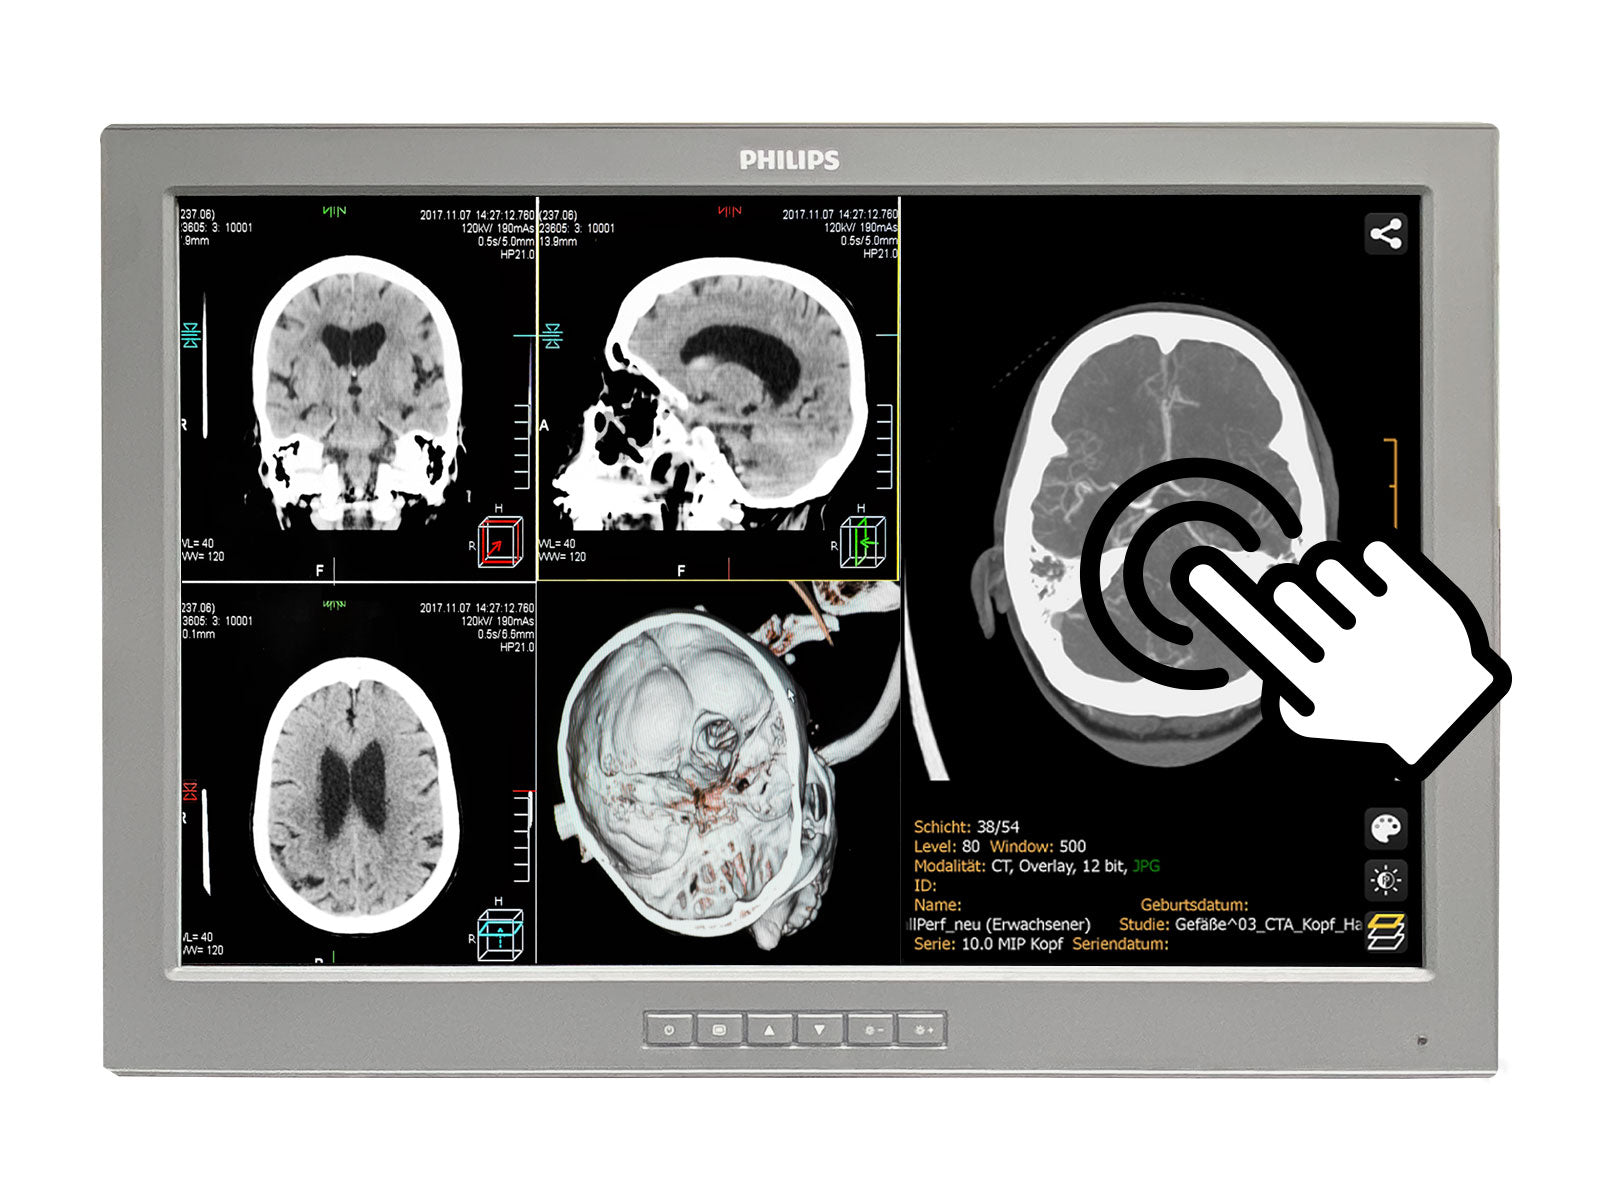 Barco P240-LTv Touchscreen MED24ESB 24" WUXGA 1920 x 1200 2MP Philips DICOM Clinical Review Monitor by Fimi Barco (P240-LTv)